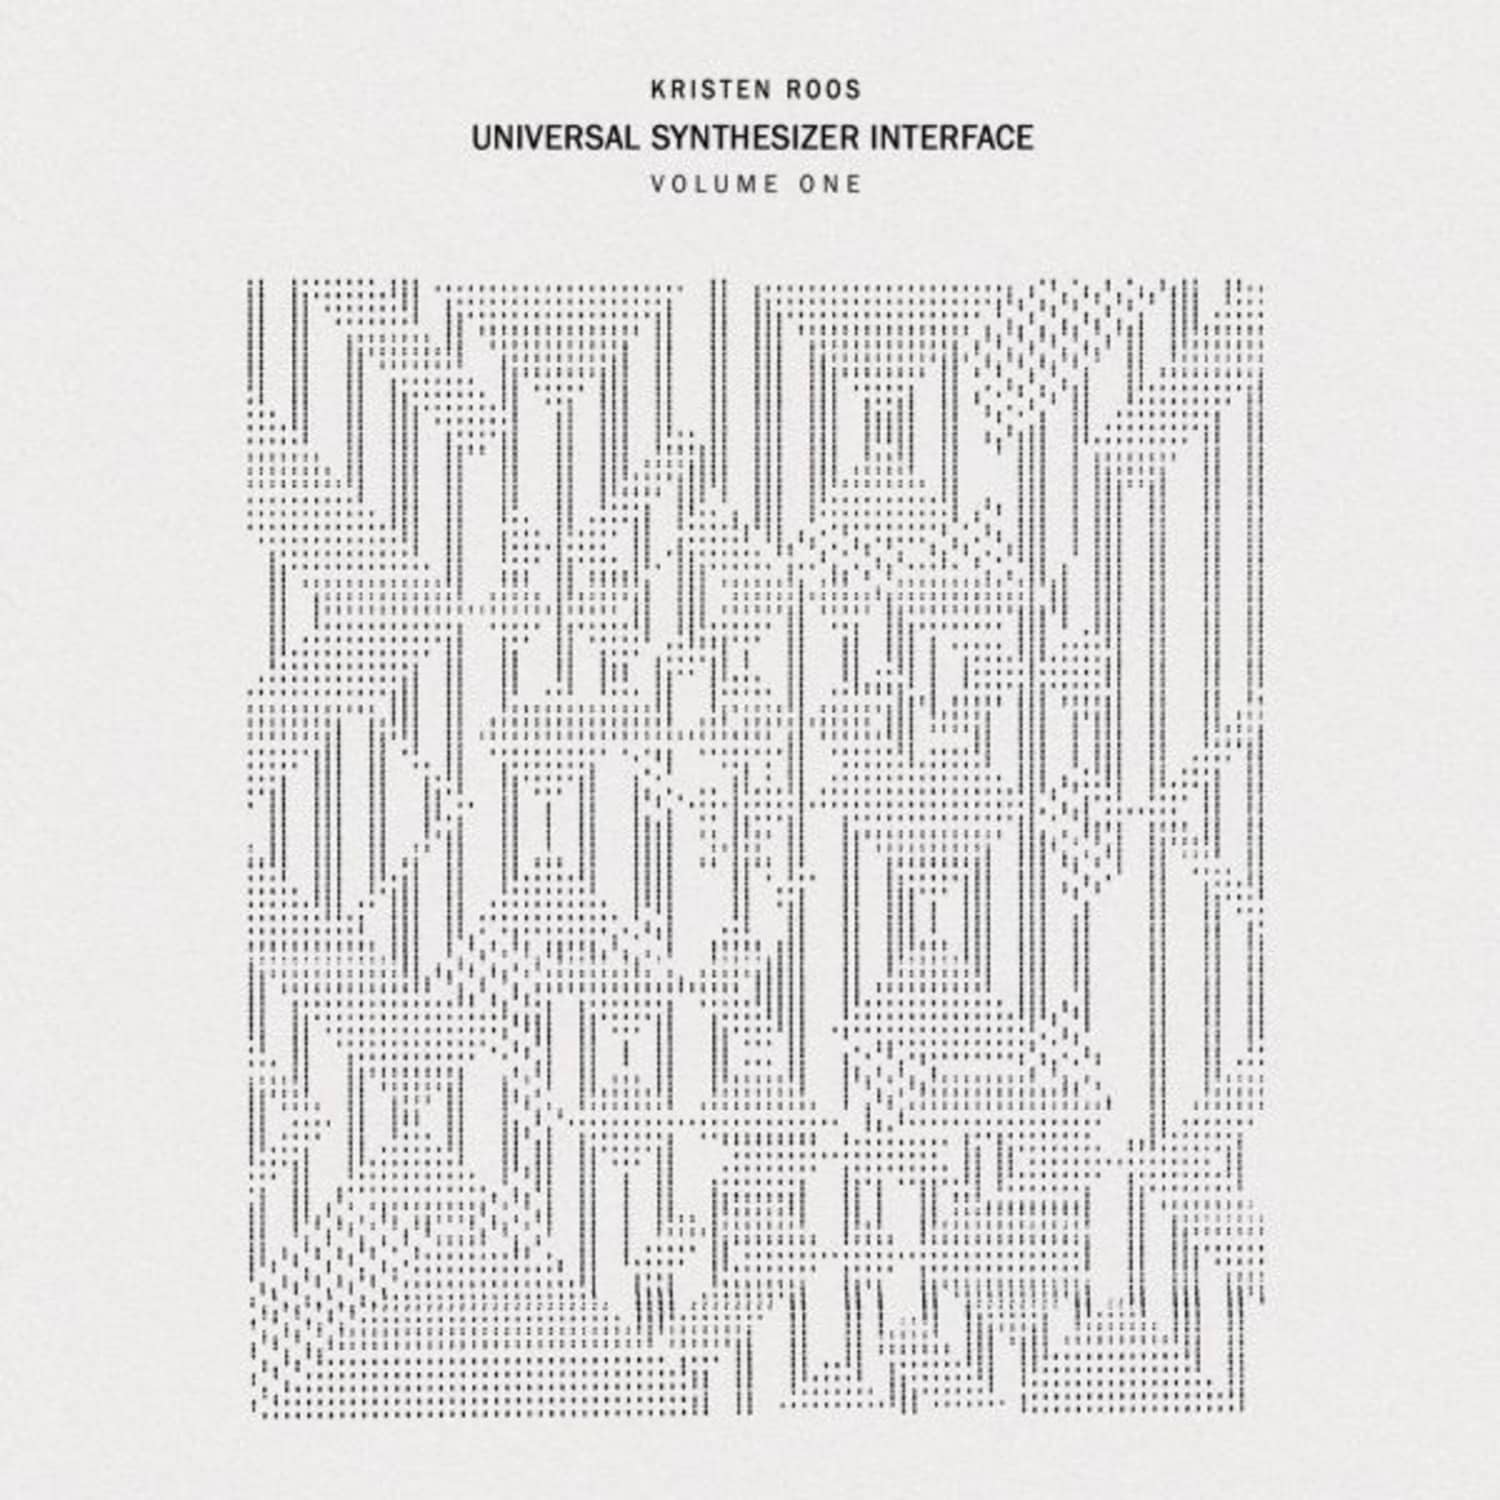  Kristen Roos - UNIVERSAL SYNTHESIZER INTERFACE VOL.1 